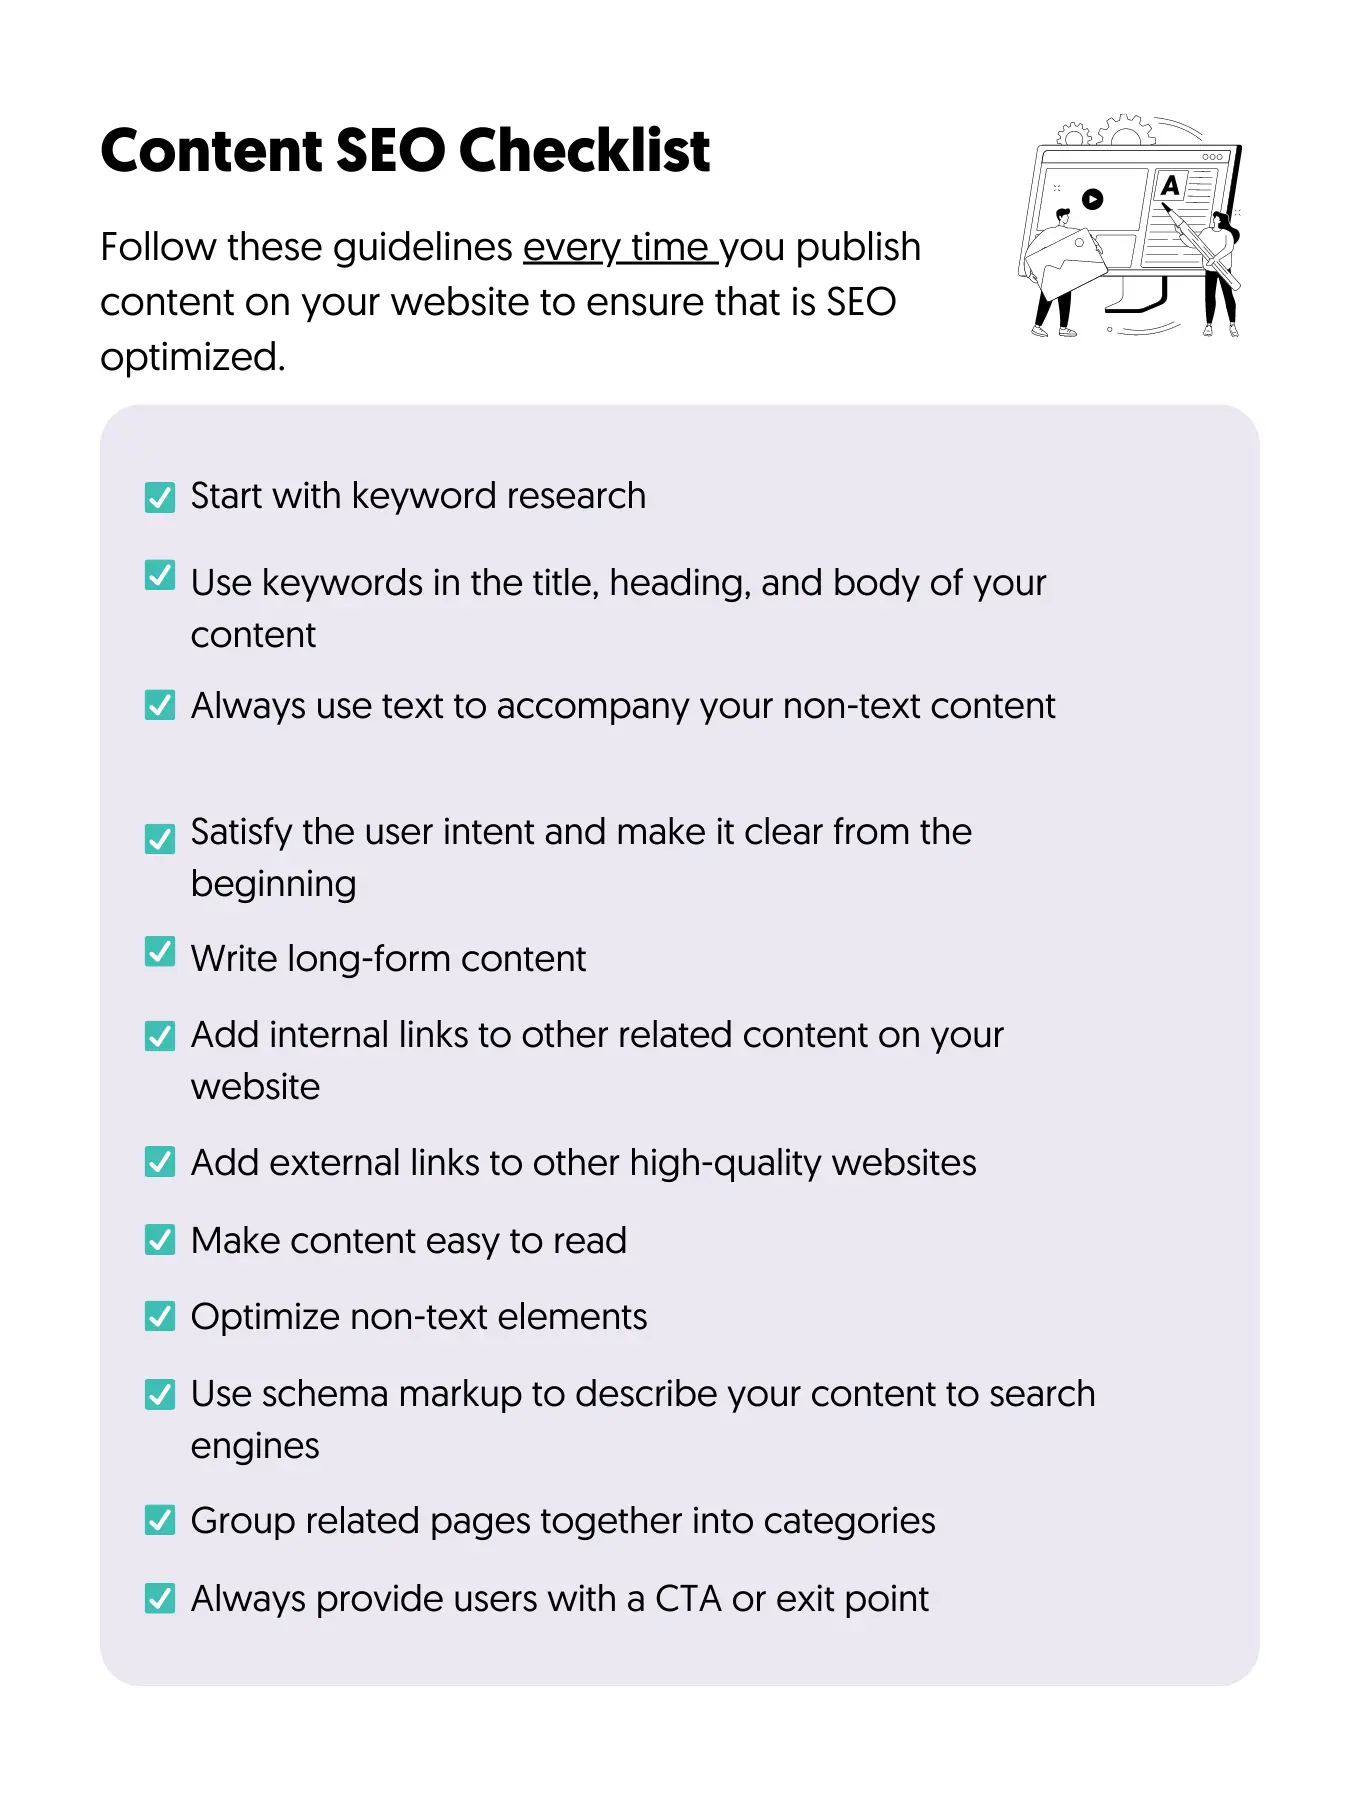 SEO Content Checklist for Freelance Writers